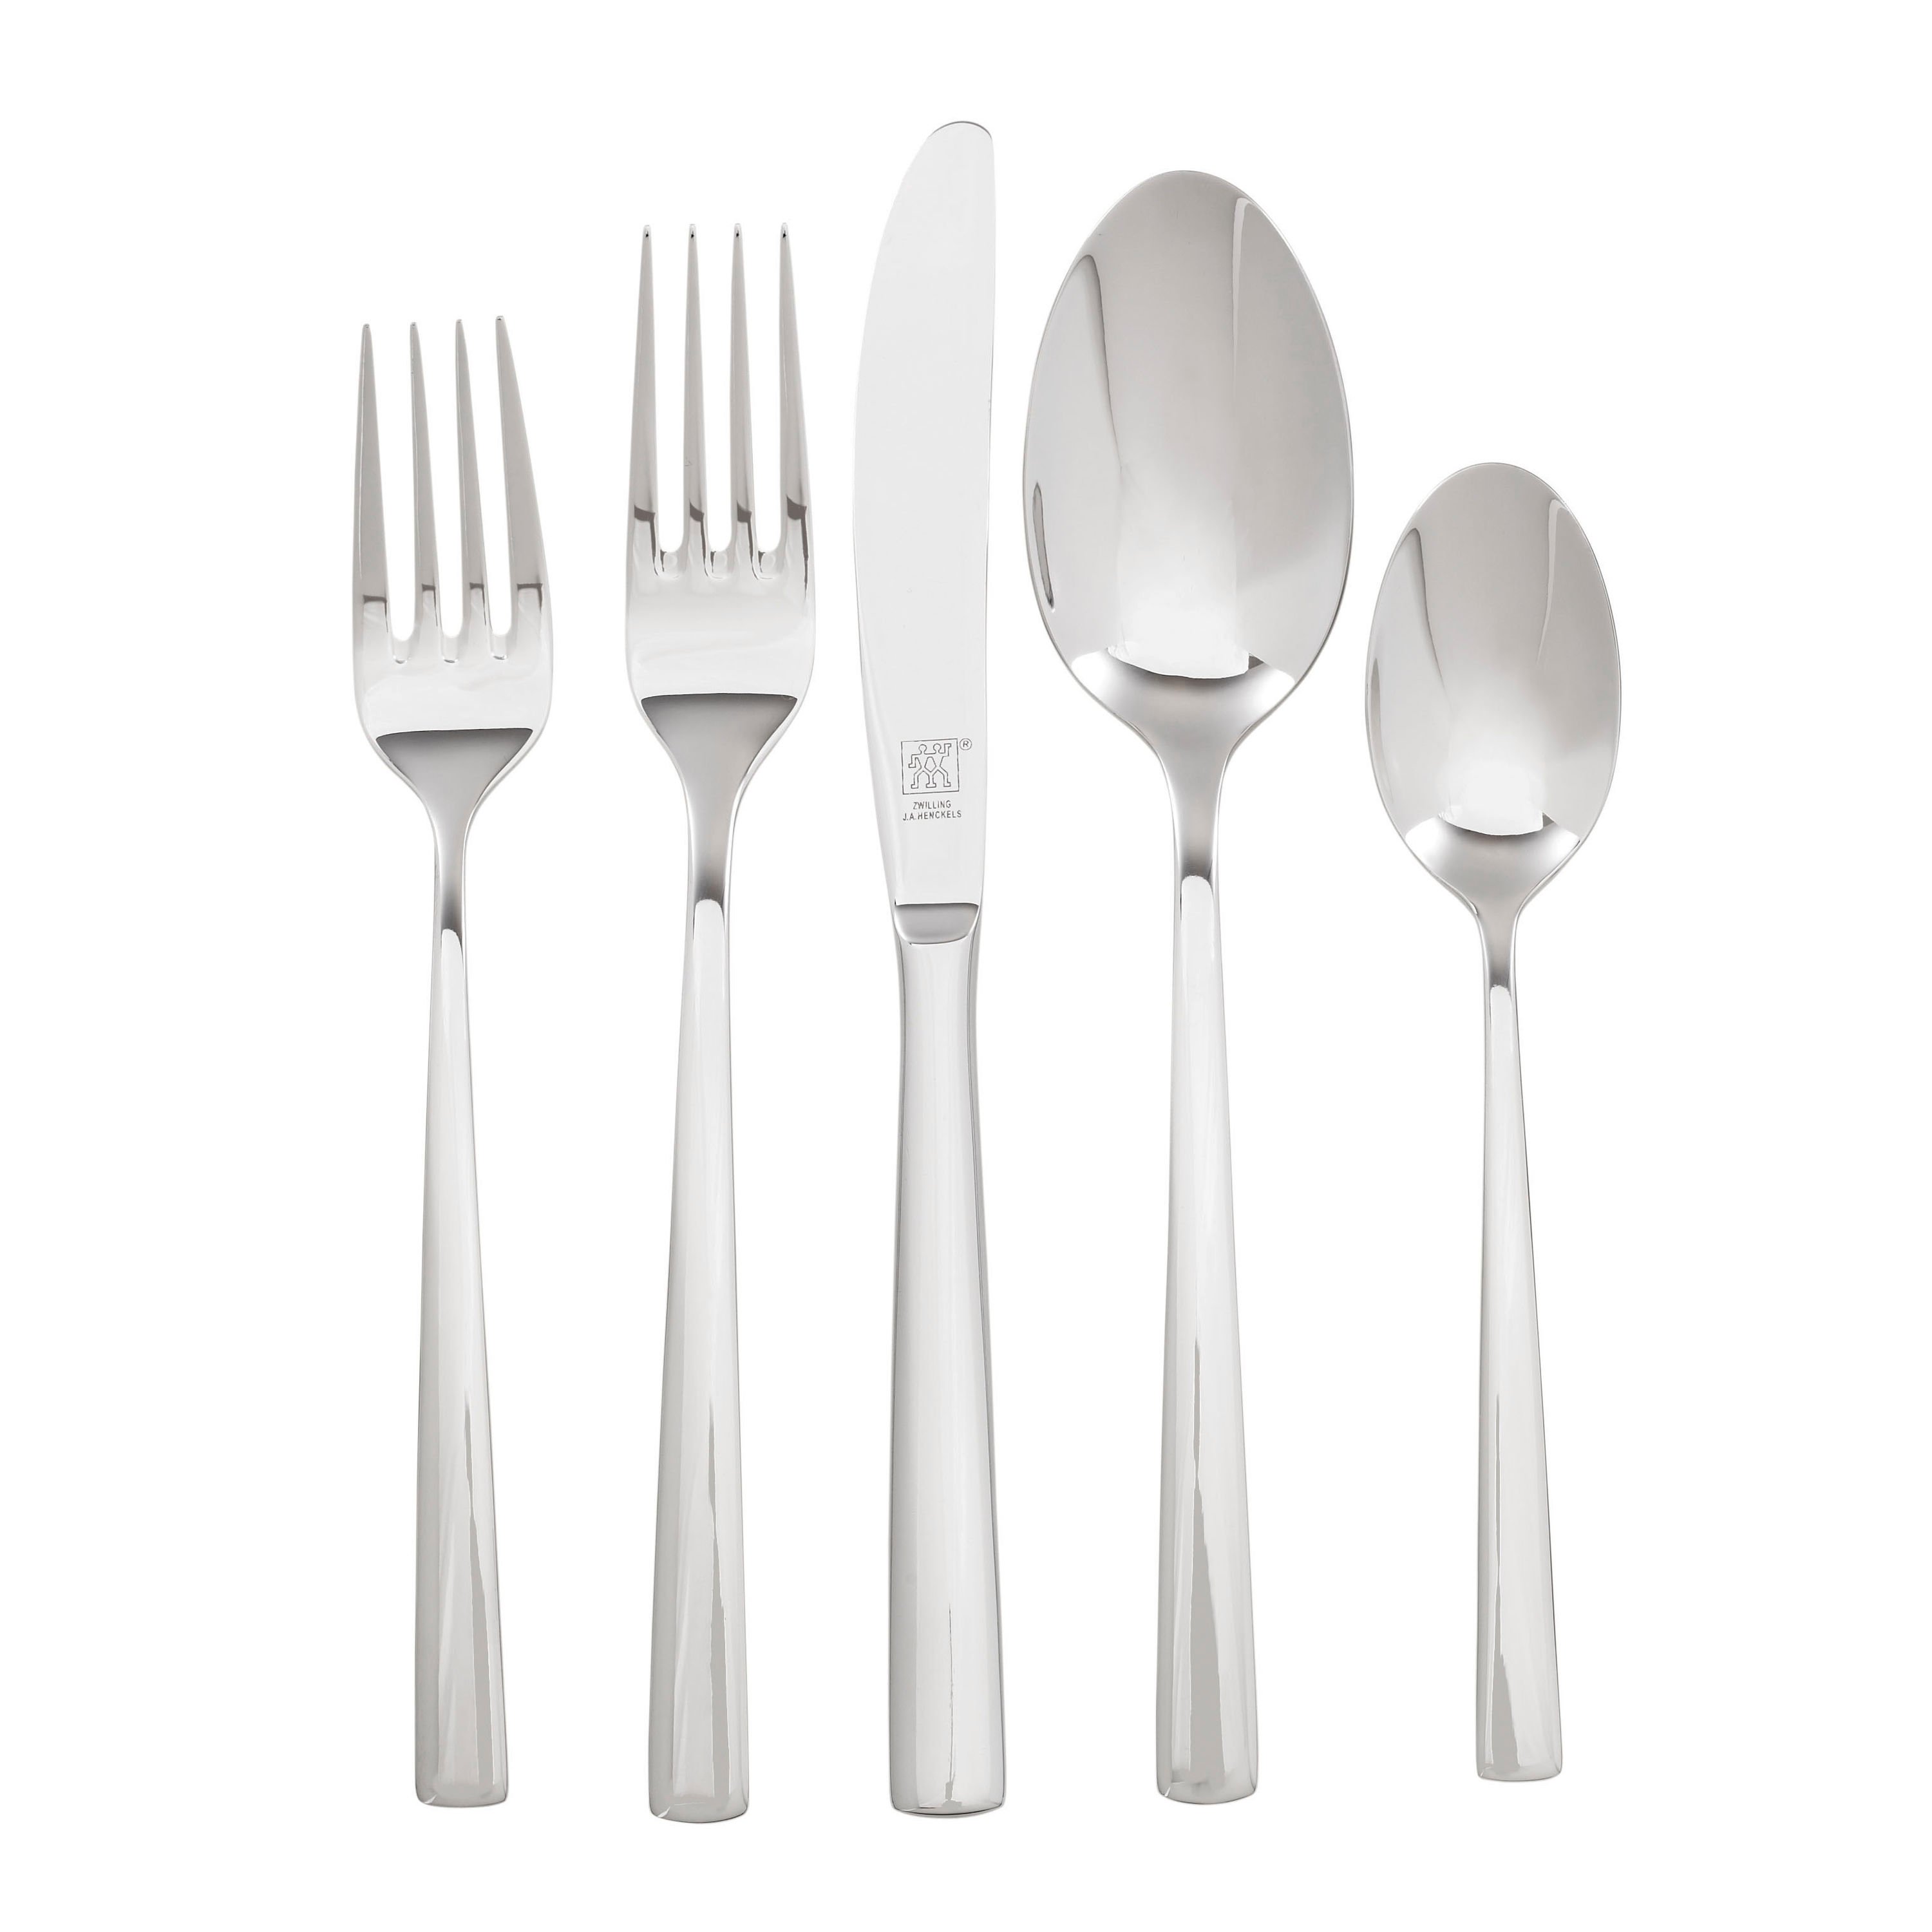 Silverware NEW Oneida Stainless FORTE Flatware Your Choice 